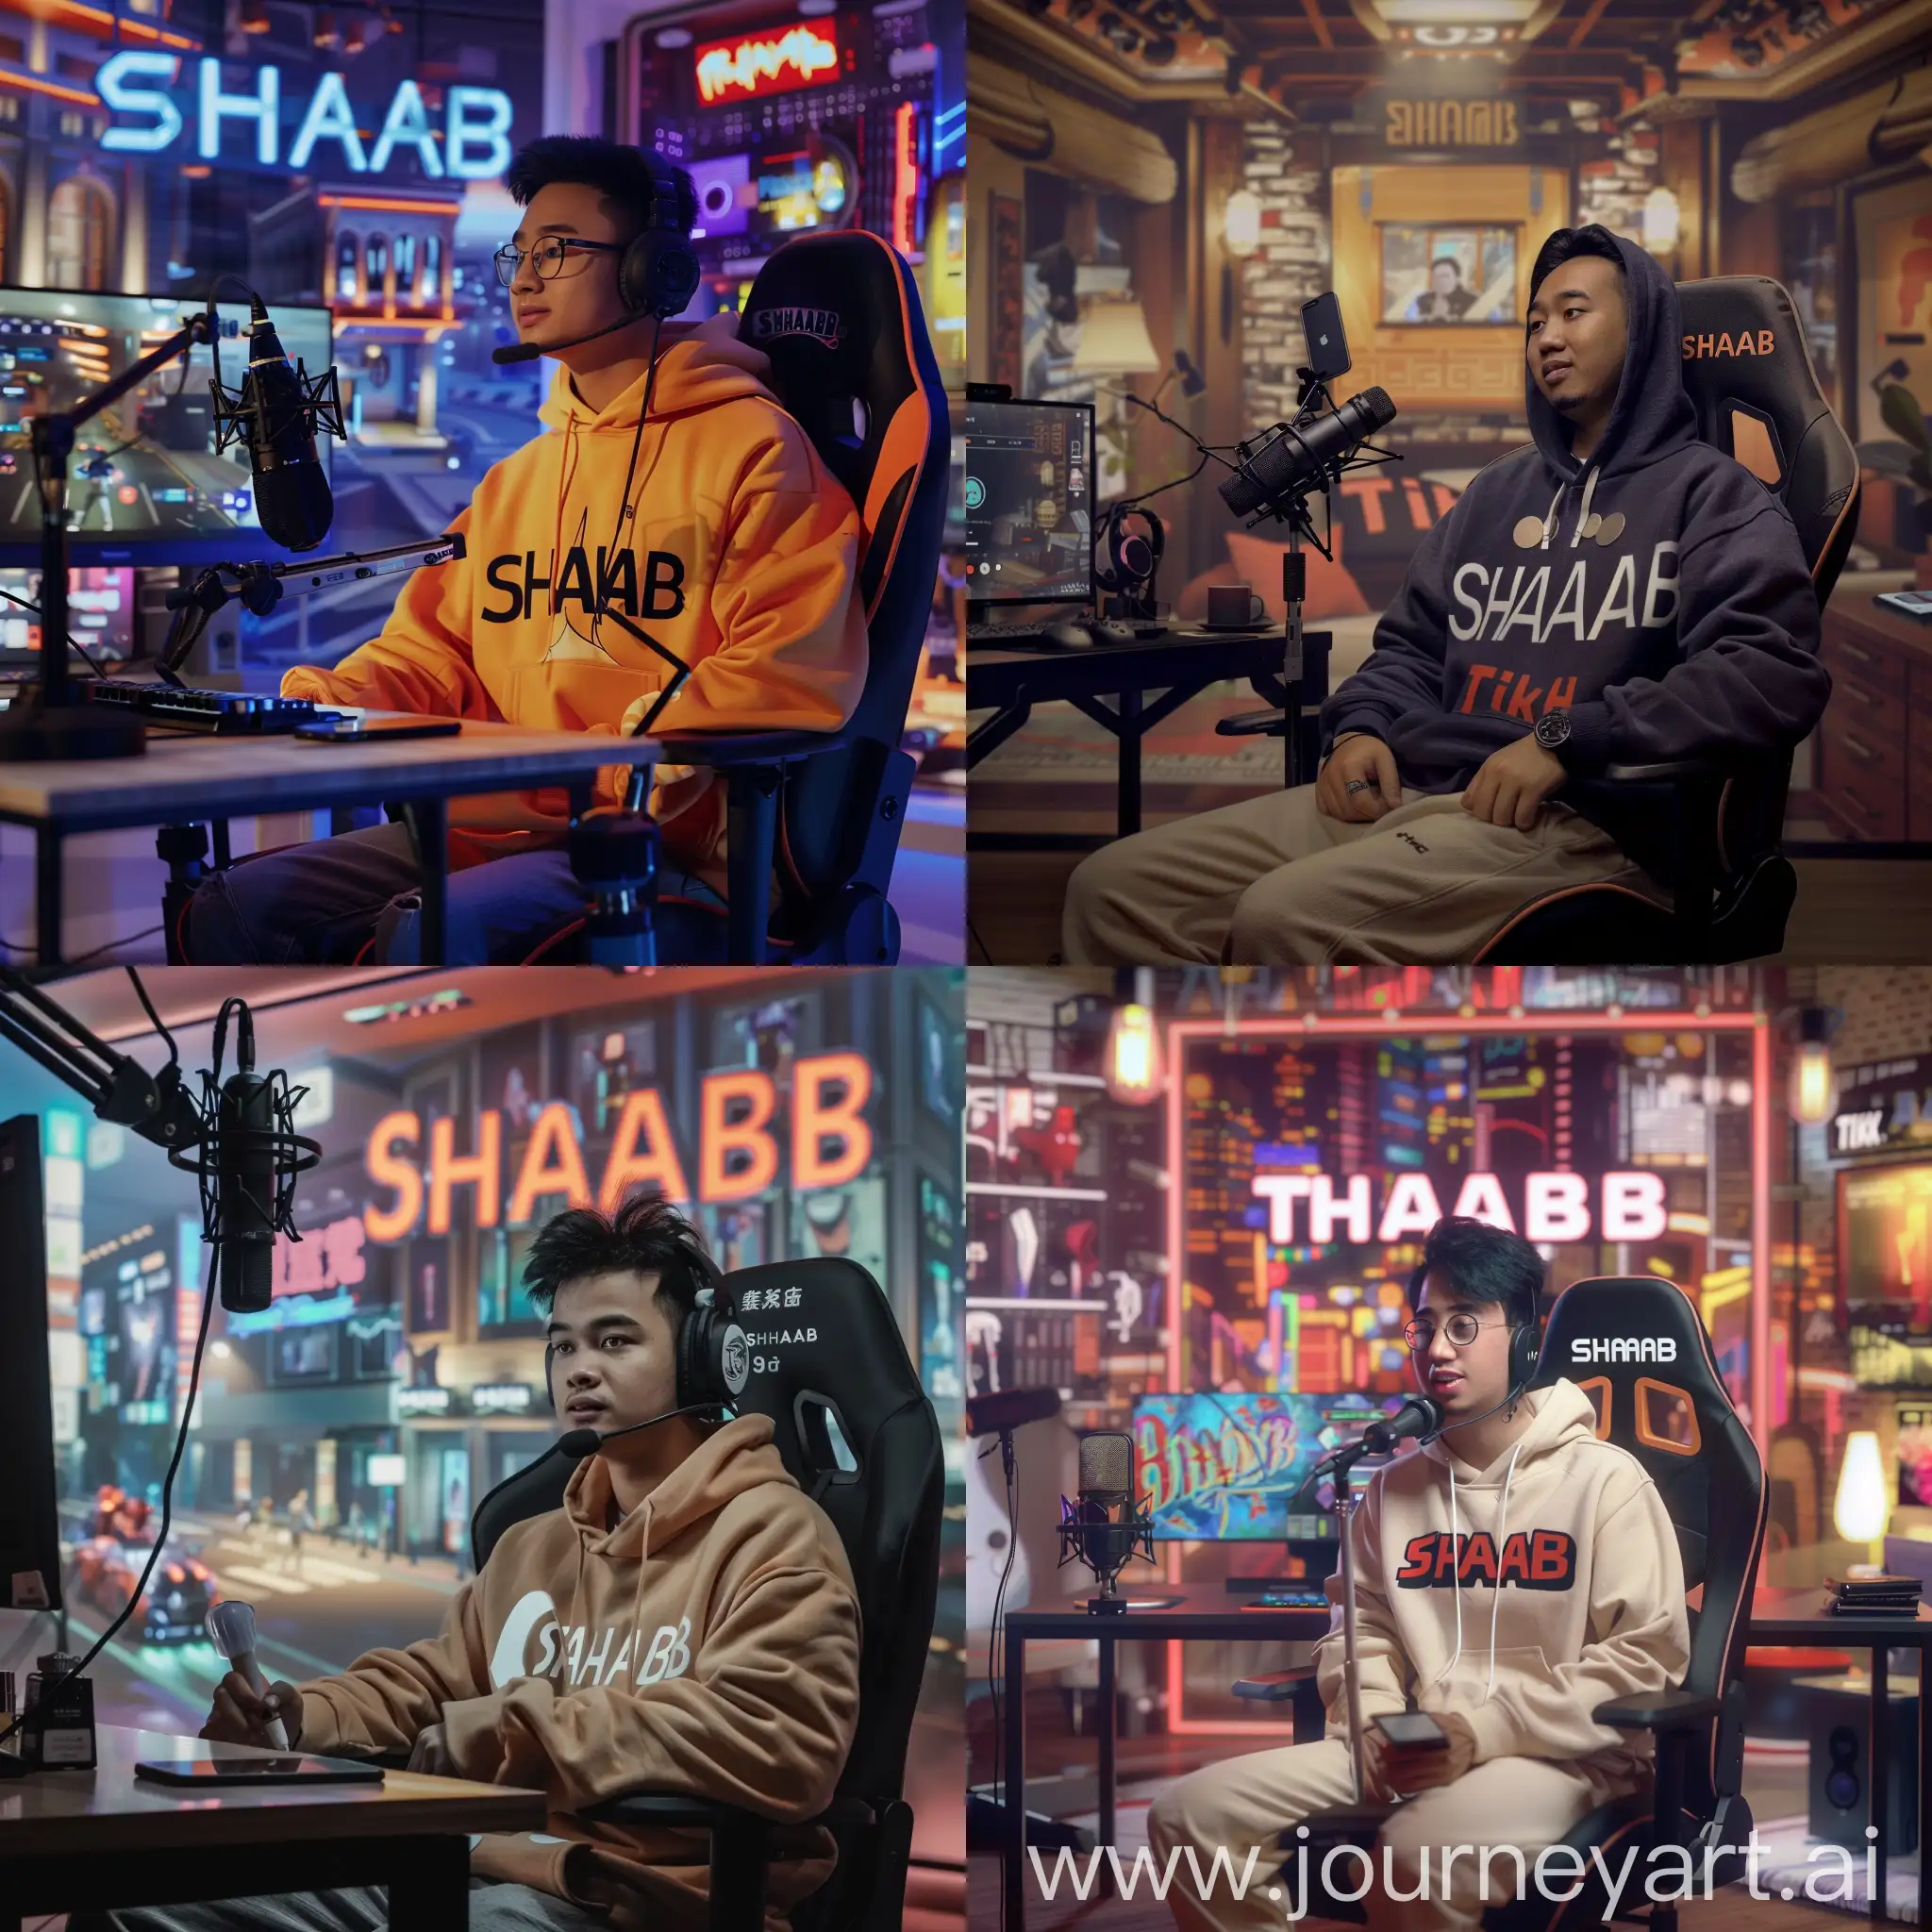 A 32-year-old Indonesian MEN is making a podcast on the TikTok application, sitting in a gaming chair wearing a 'SHAHAB' hoodie. In front of him is a microphone and an Apple phone on a table, with a realistic HD background of a room with the words 'SHAHAB' written on it.